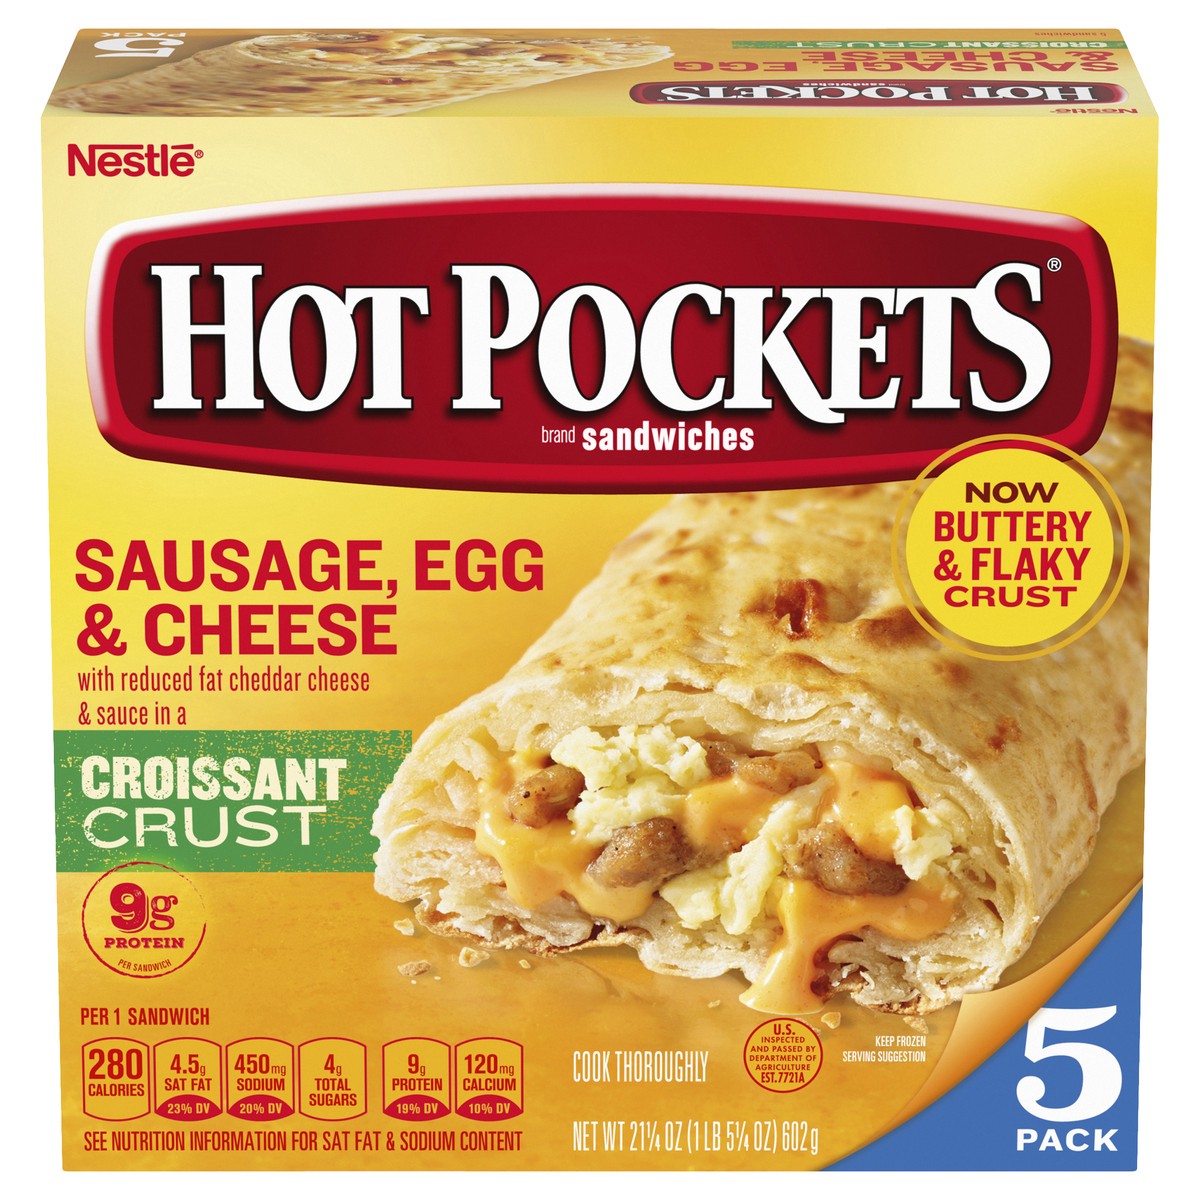 slide 1 of 6, Hot Pockets Sausage, Egg & Cheese Croissant Crust Frozen Breakfast Sandwiches, Breakfast Hot Pockets Made with Real Reduced Fat Cheddar Cheese, 5 Count, 5 ct